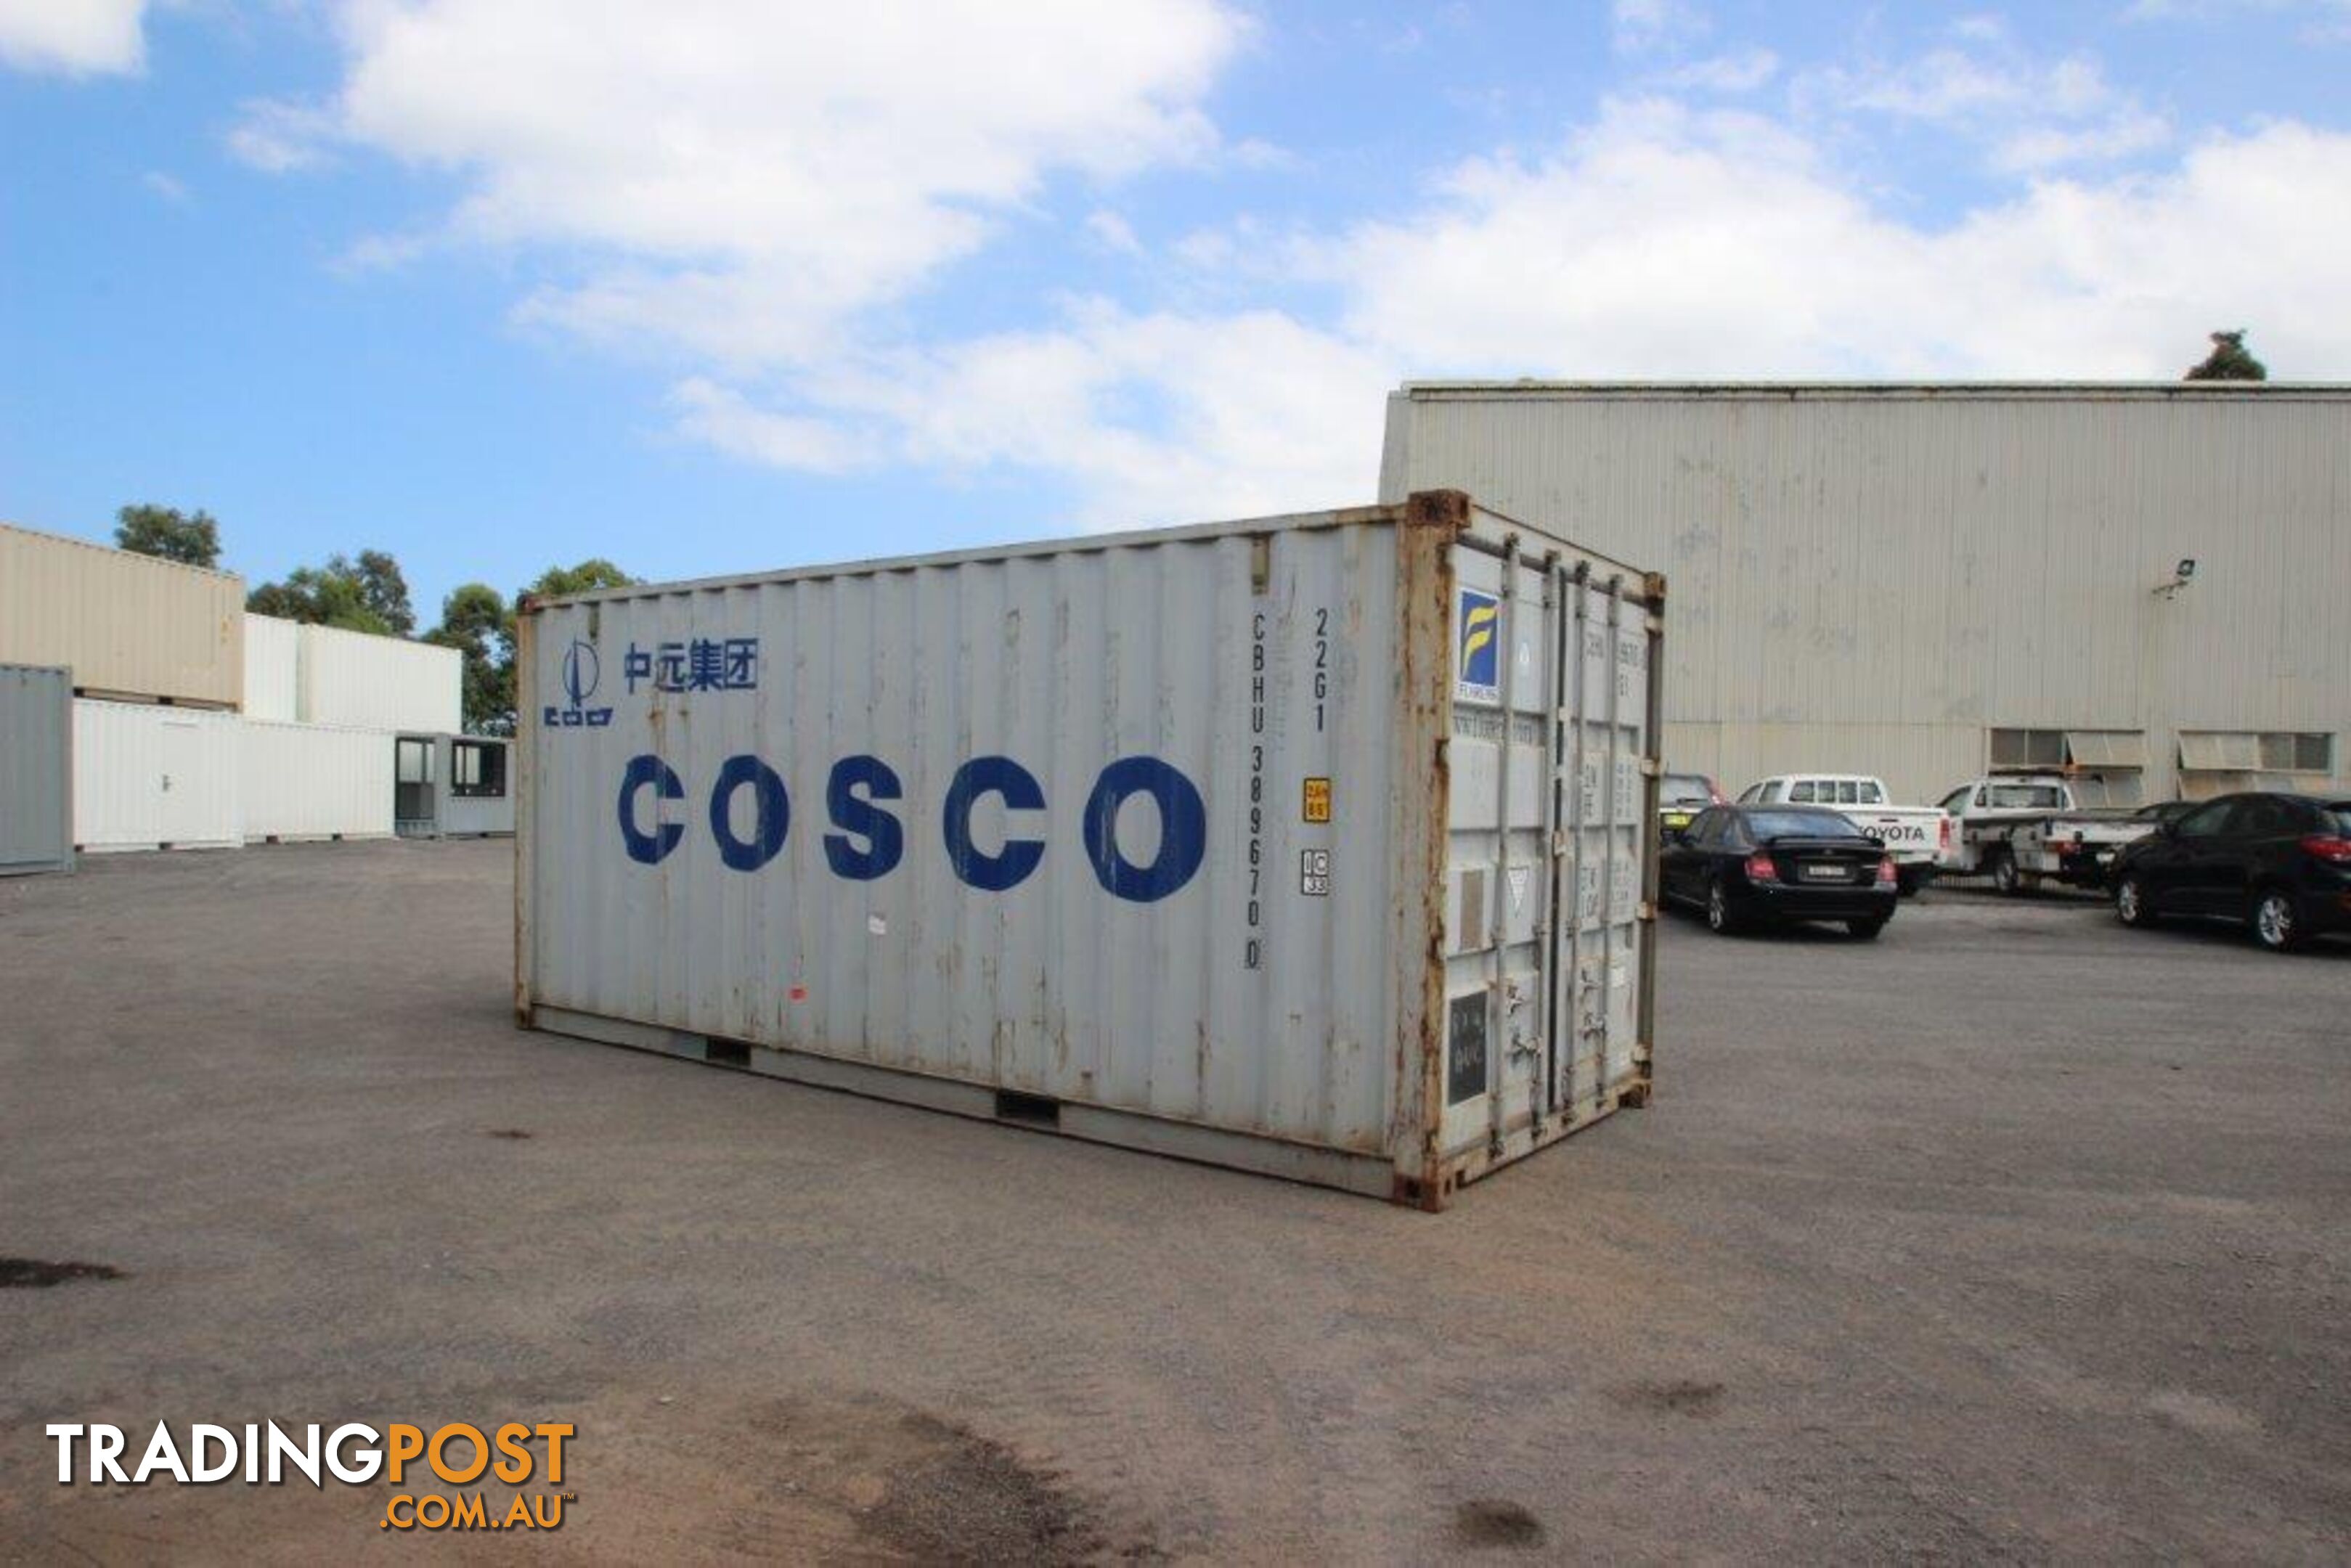 Used 20ft Shipping Containers Port Augusta - From $3500 + GST